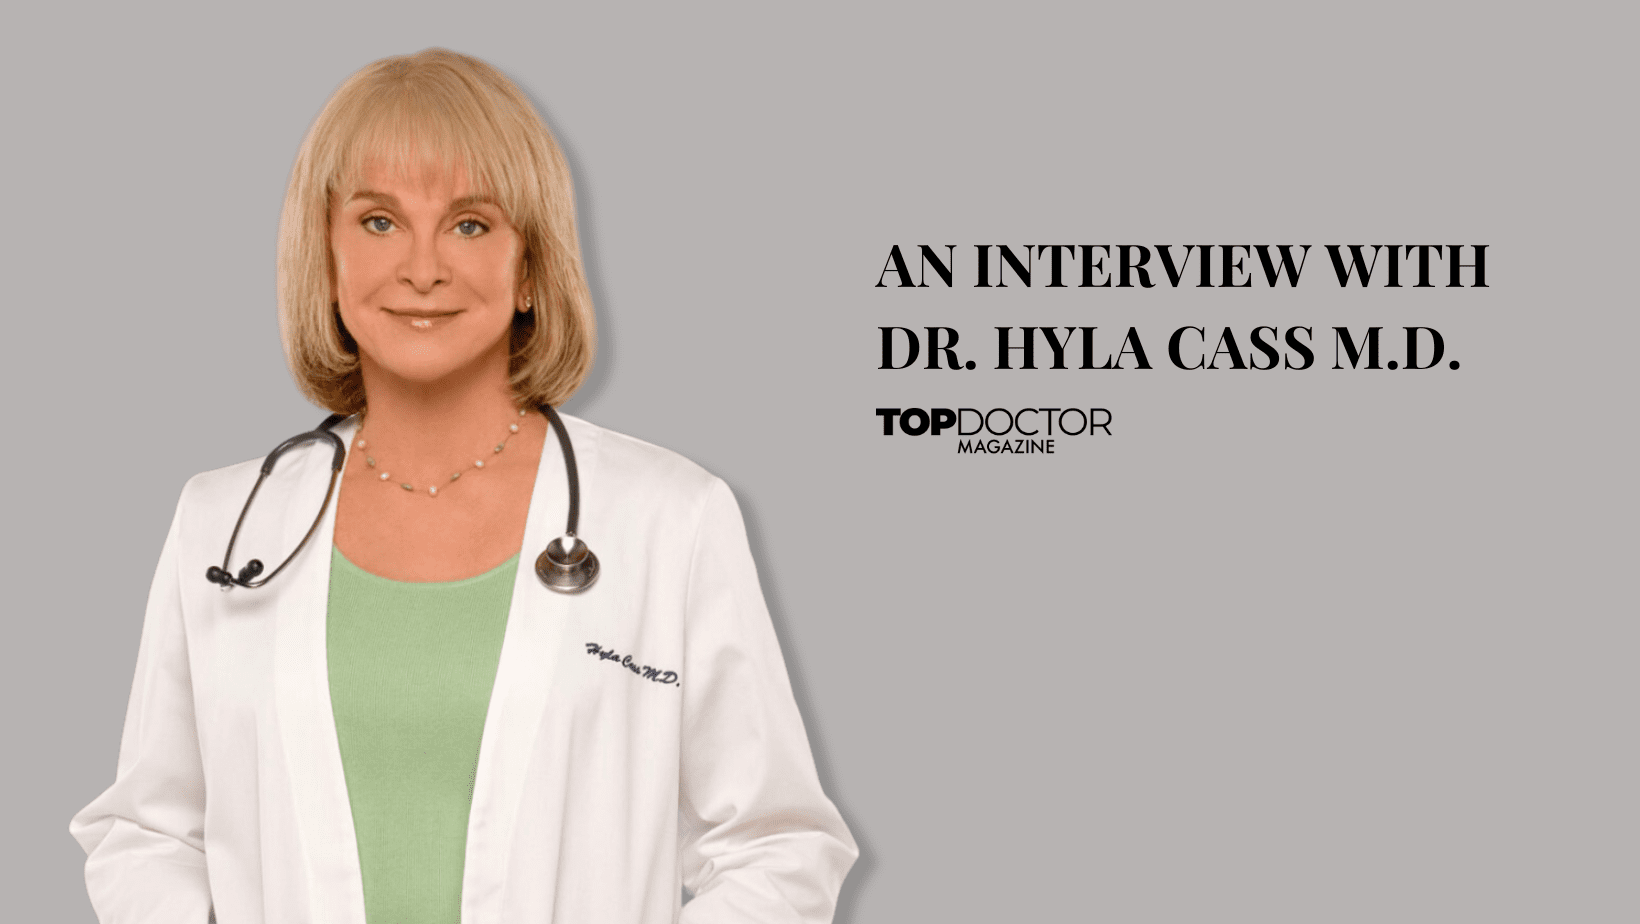 A Different Approach to Psychiatric Care: An Interview with Dr. Hyla Cass